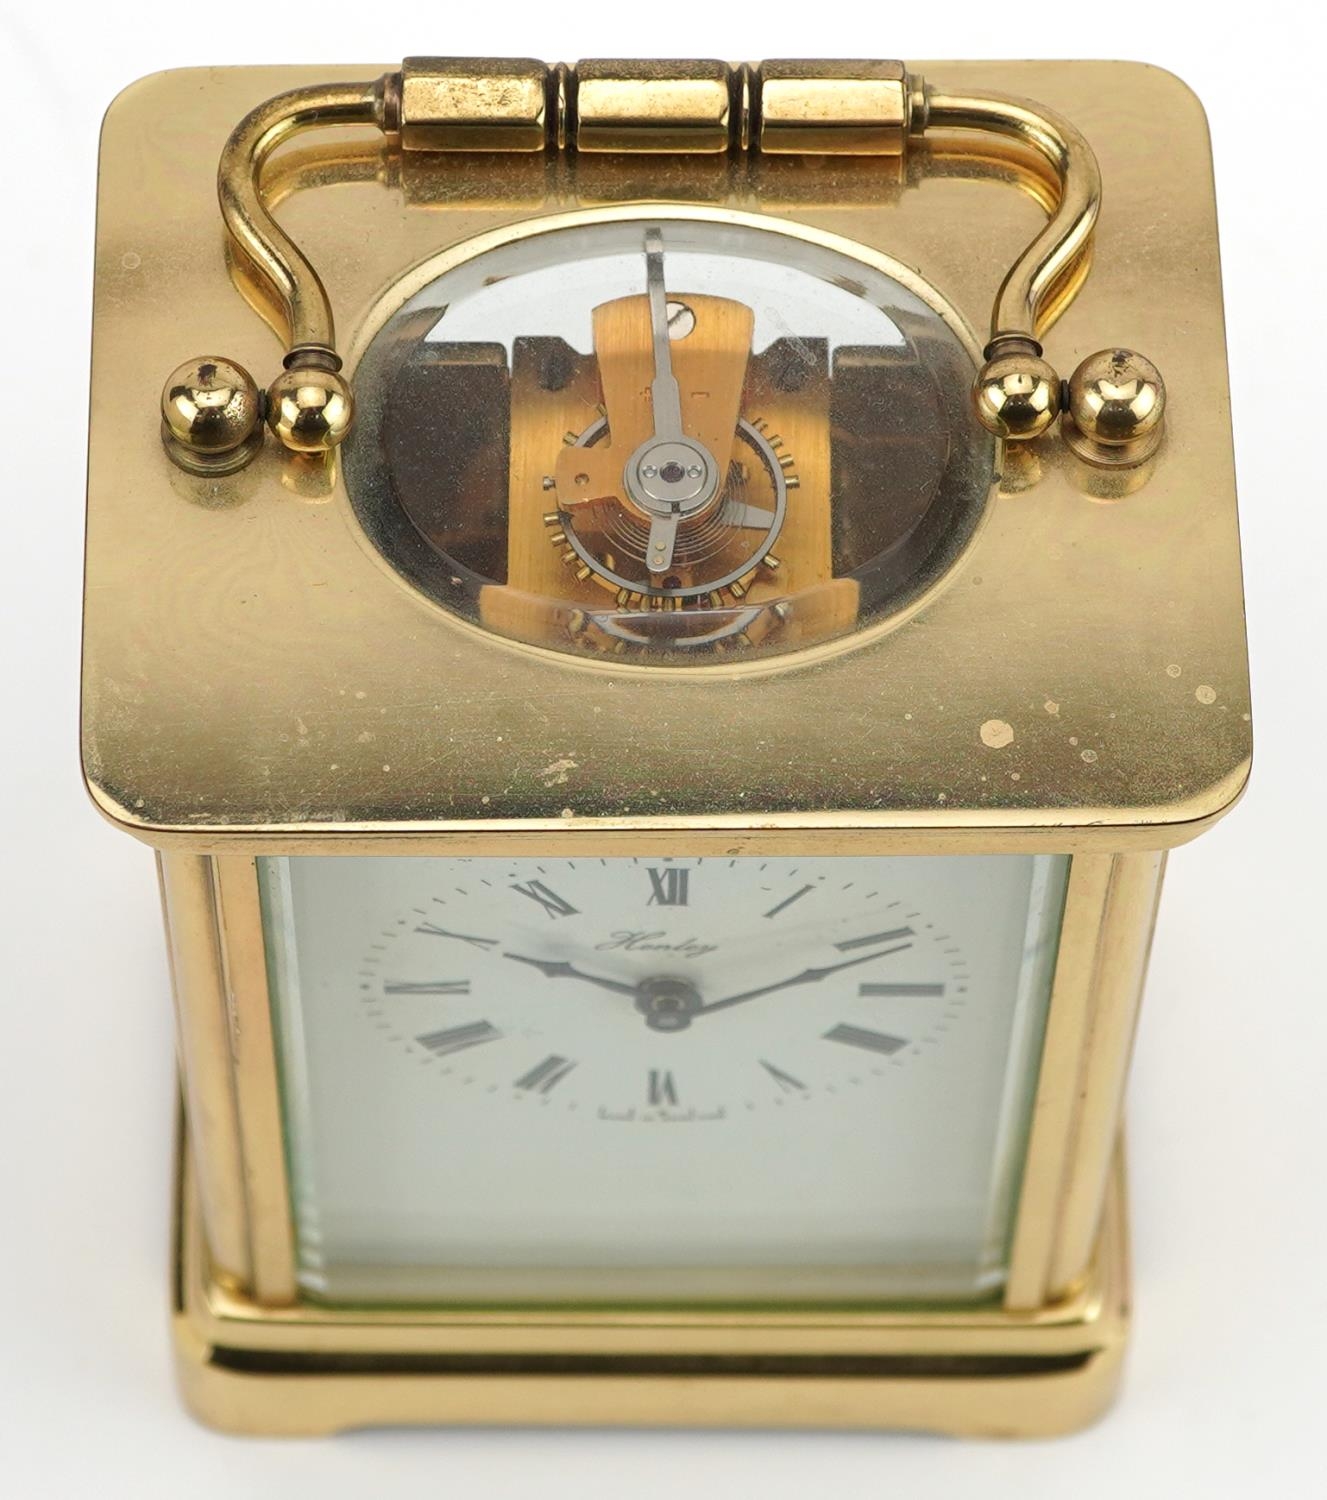 Brass cased Henley carriage clock, 11.5cm high excluding the swing handle - Image 4 of 5